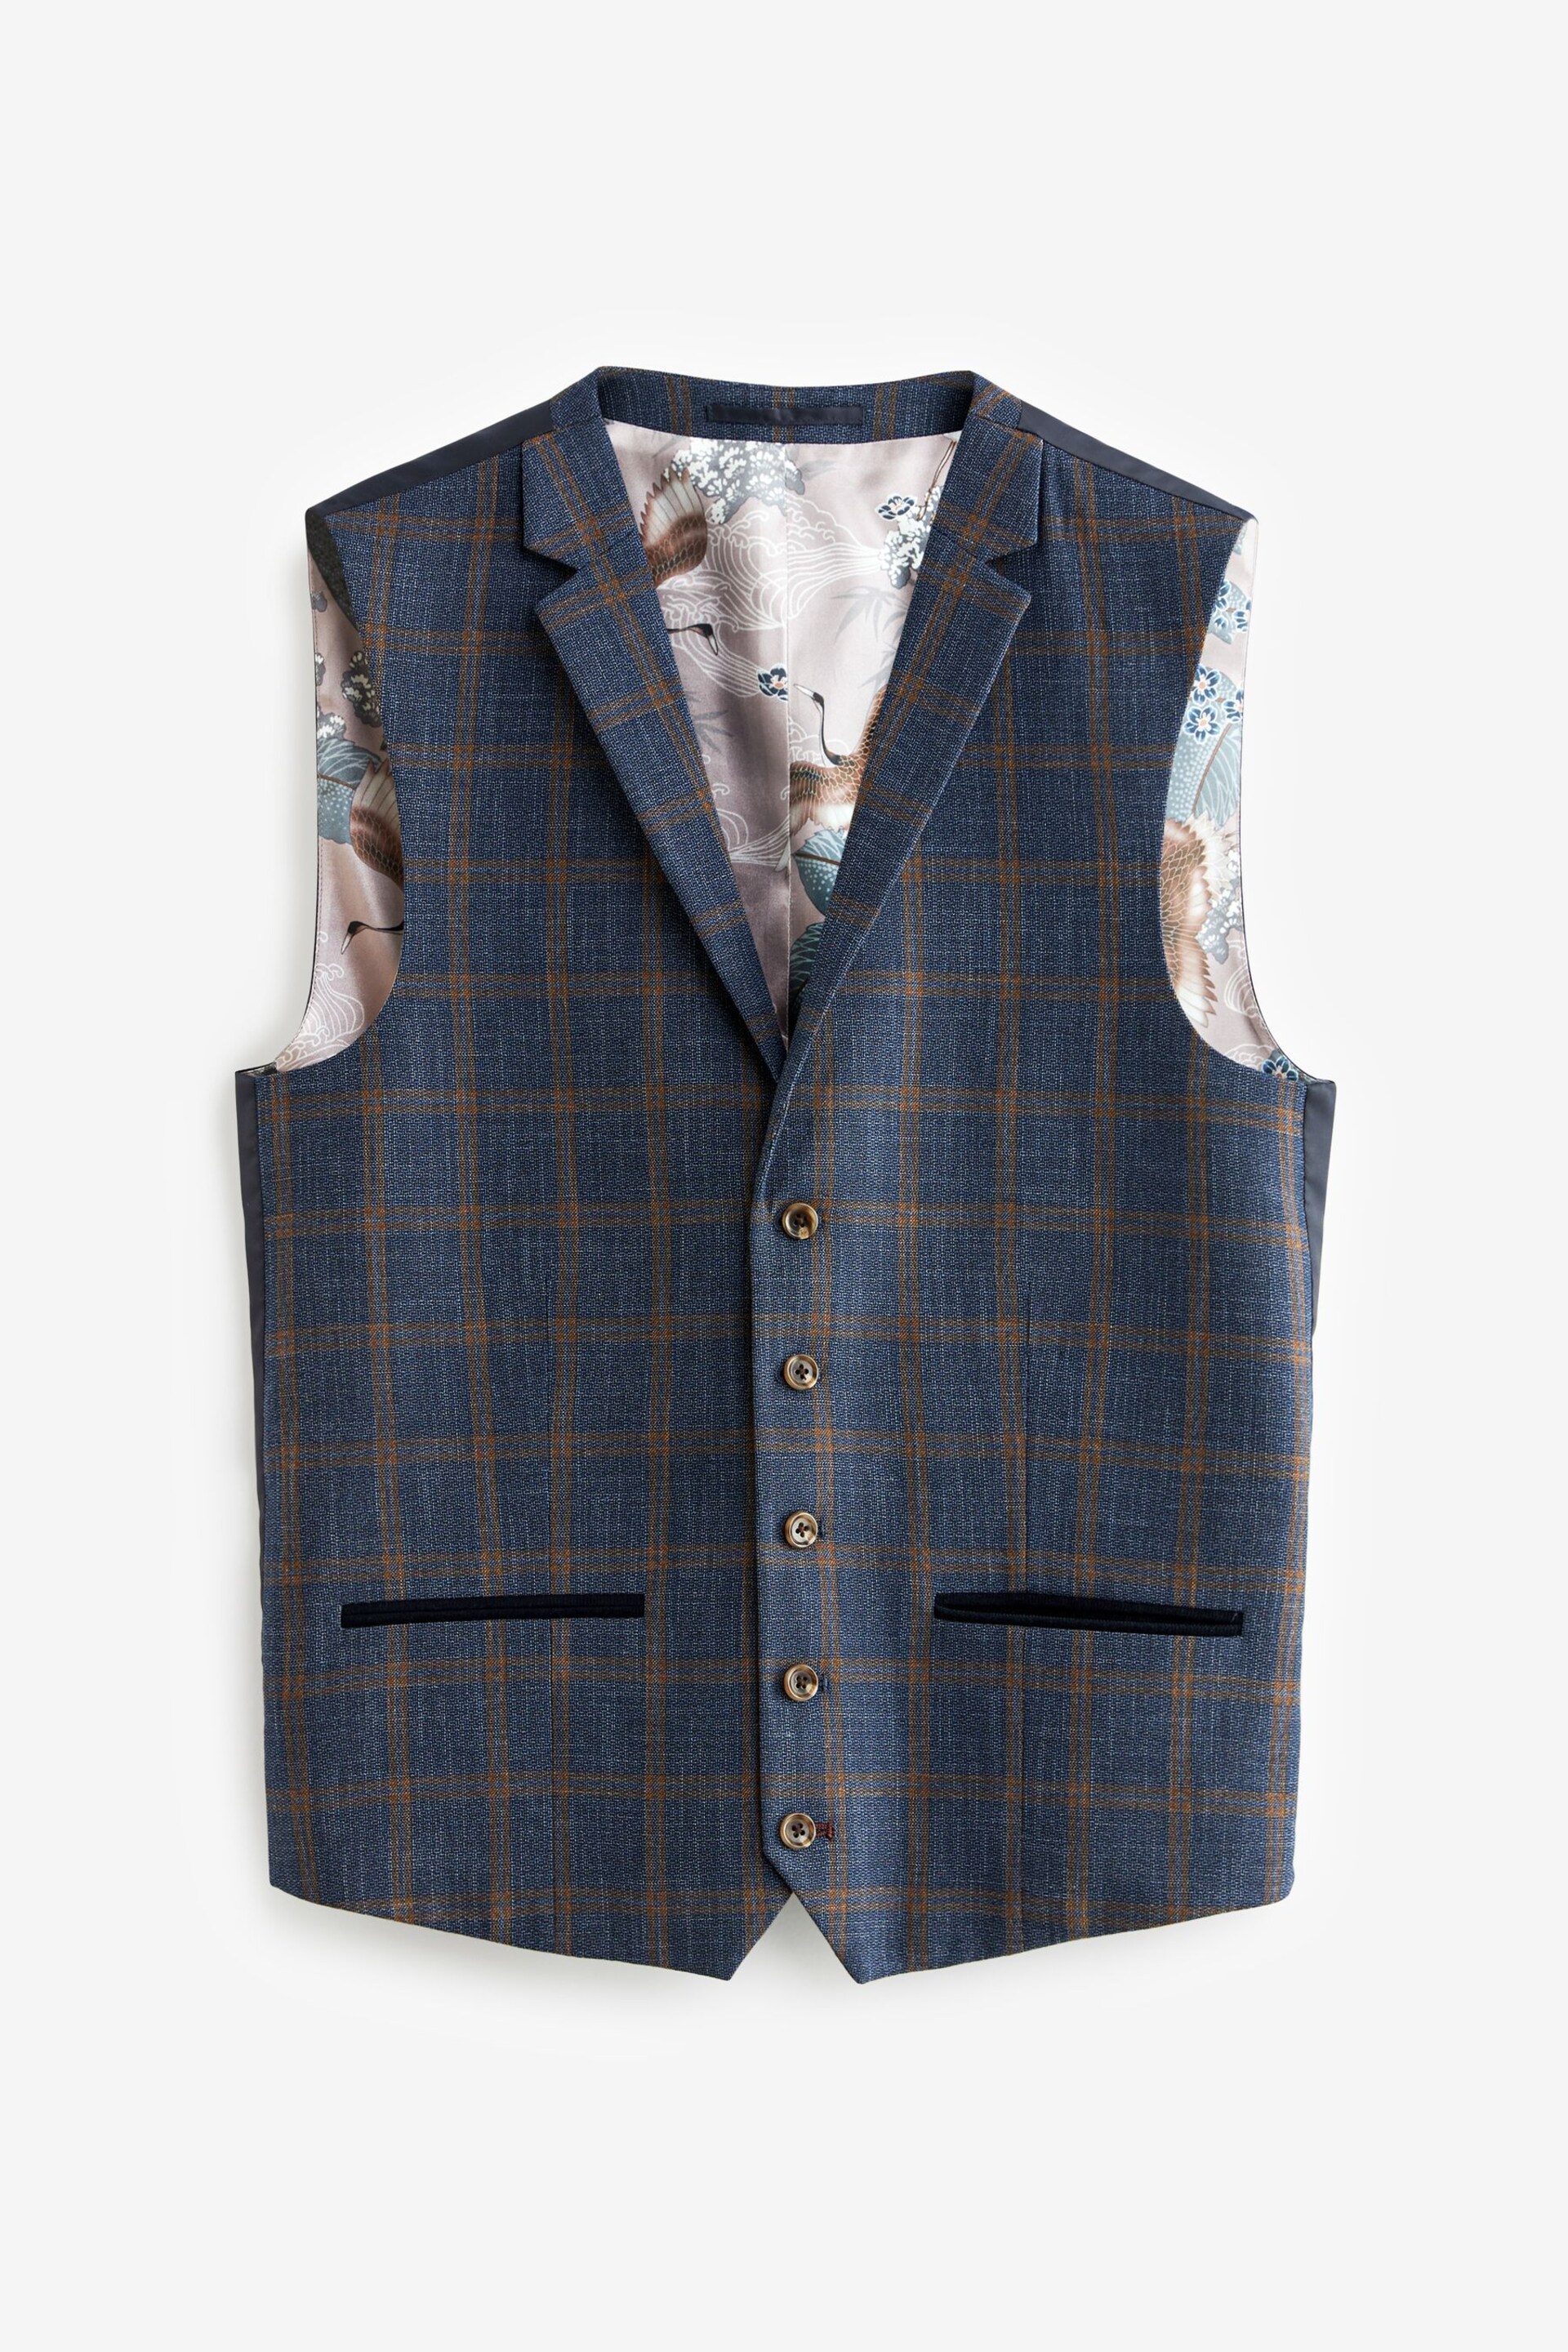 Bright Blue Skinny Trimmed Check Suit Waistcoat - Image 7 of 10